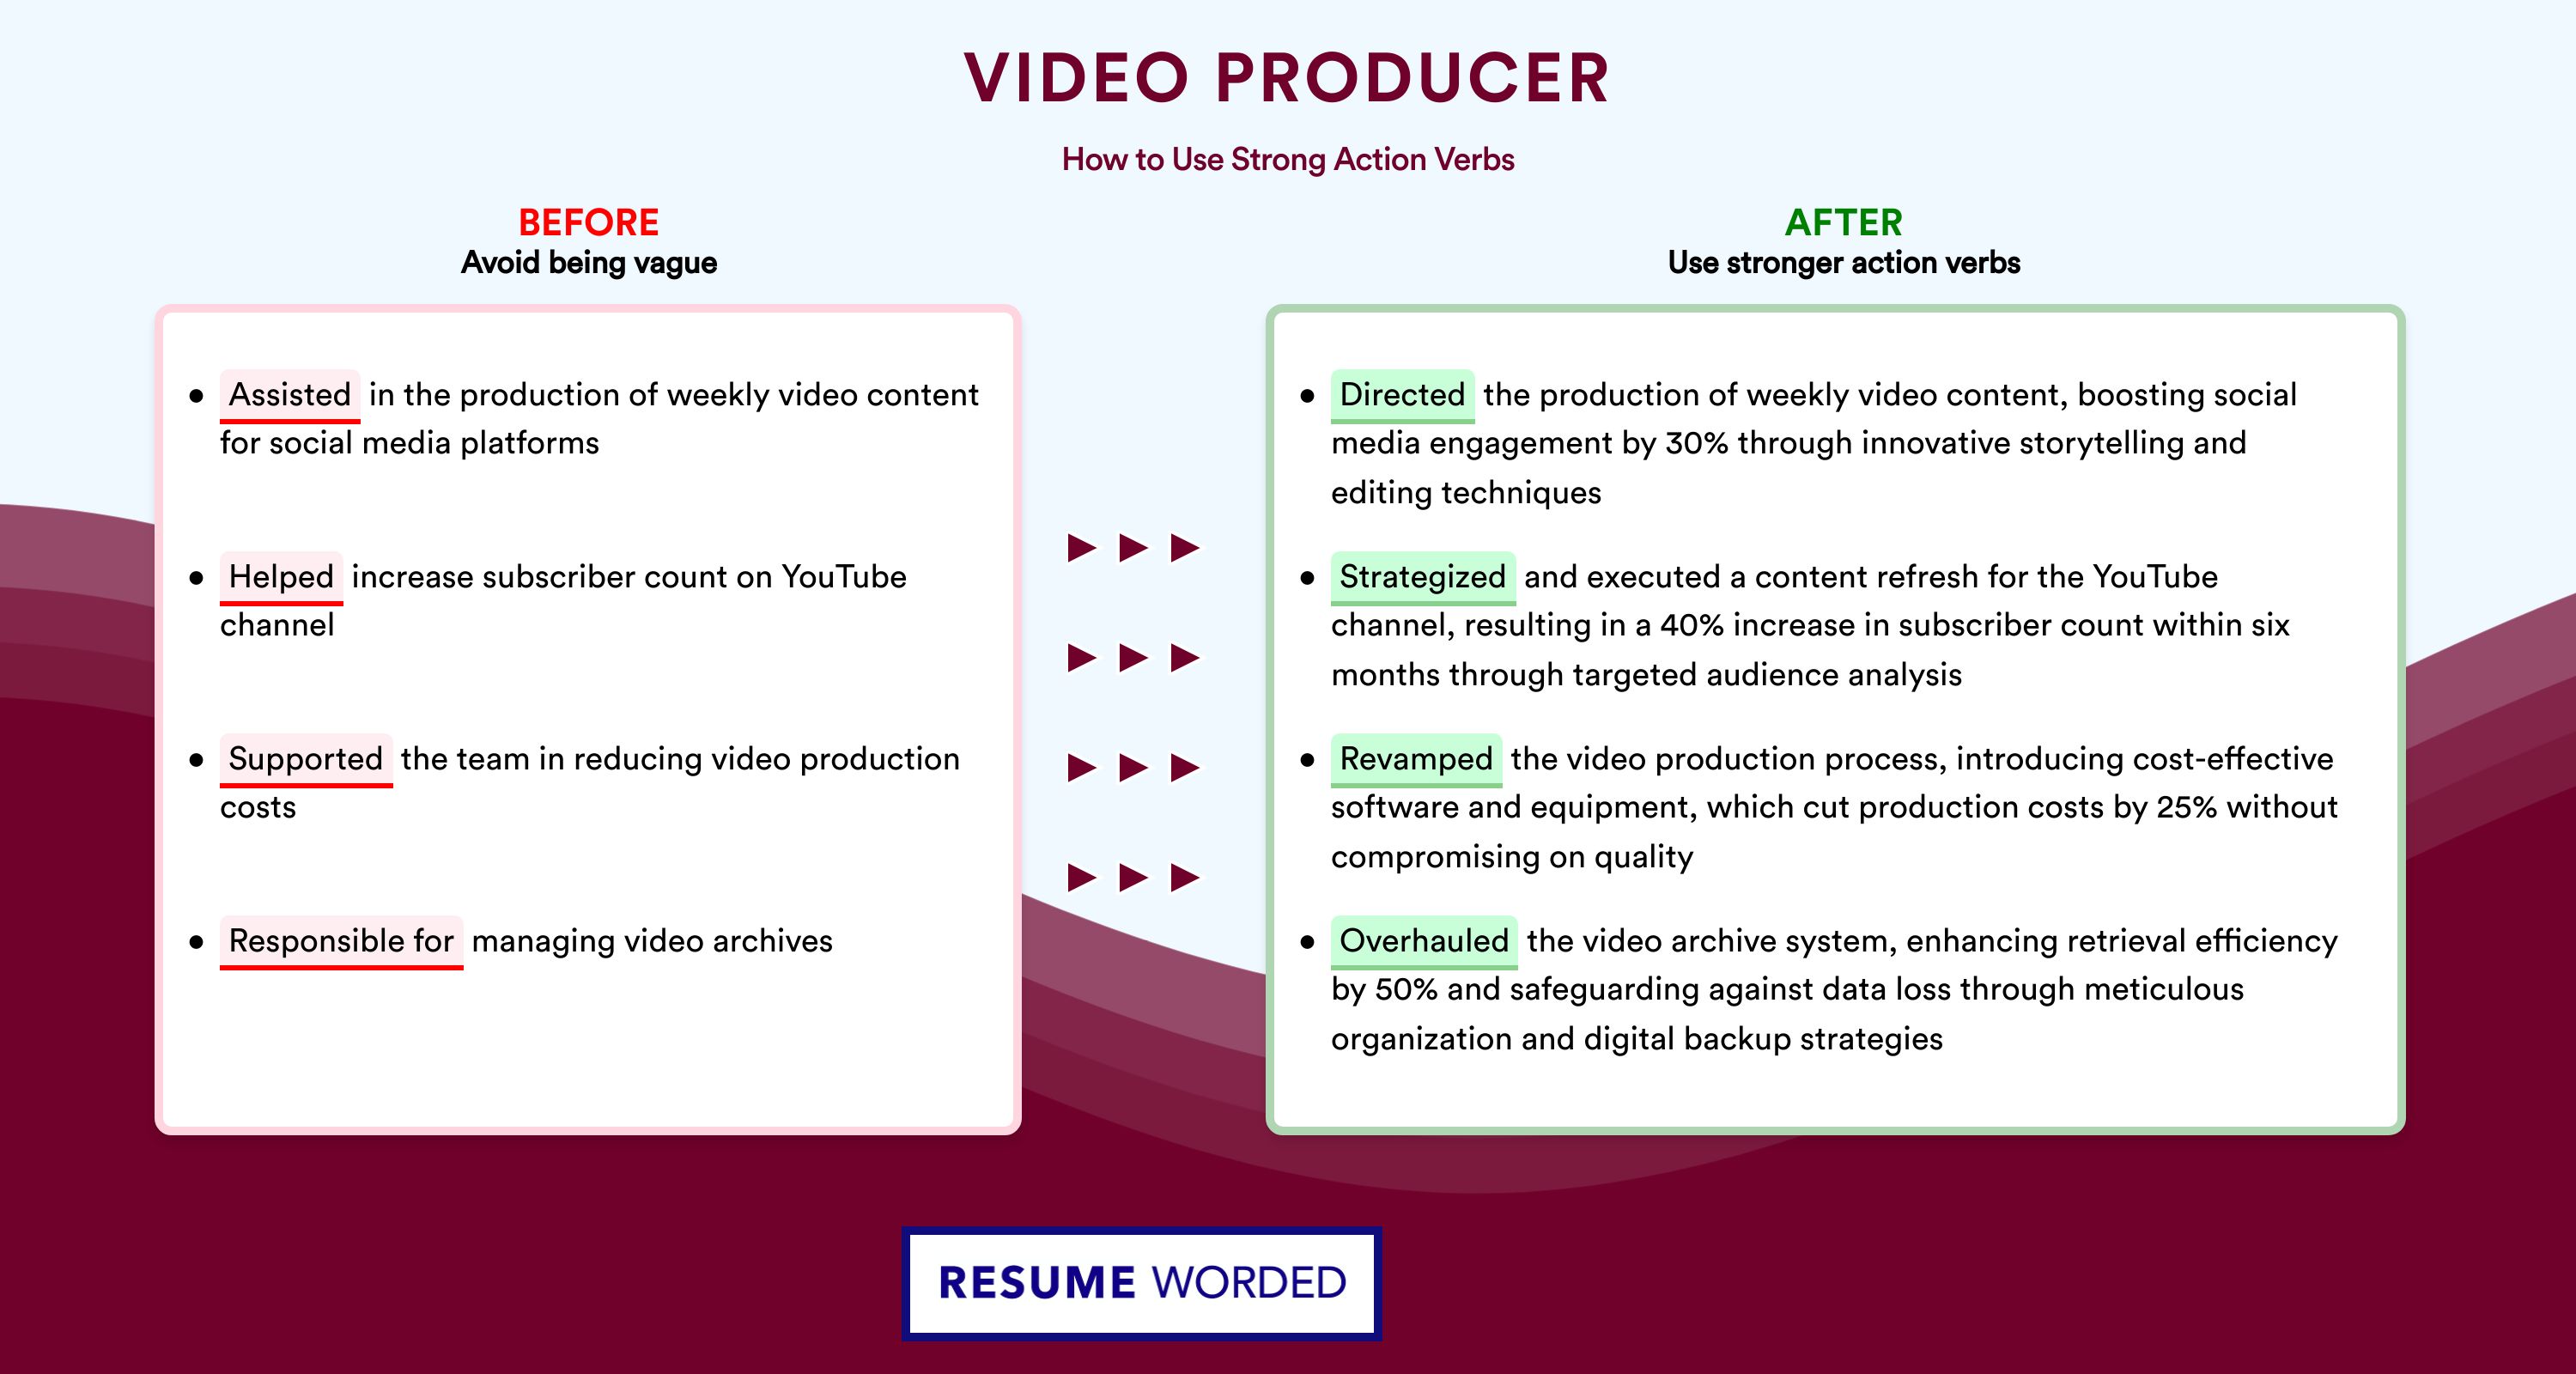 Action Verbs for Video Producer